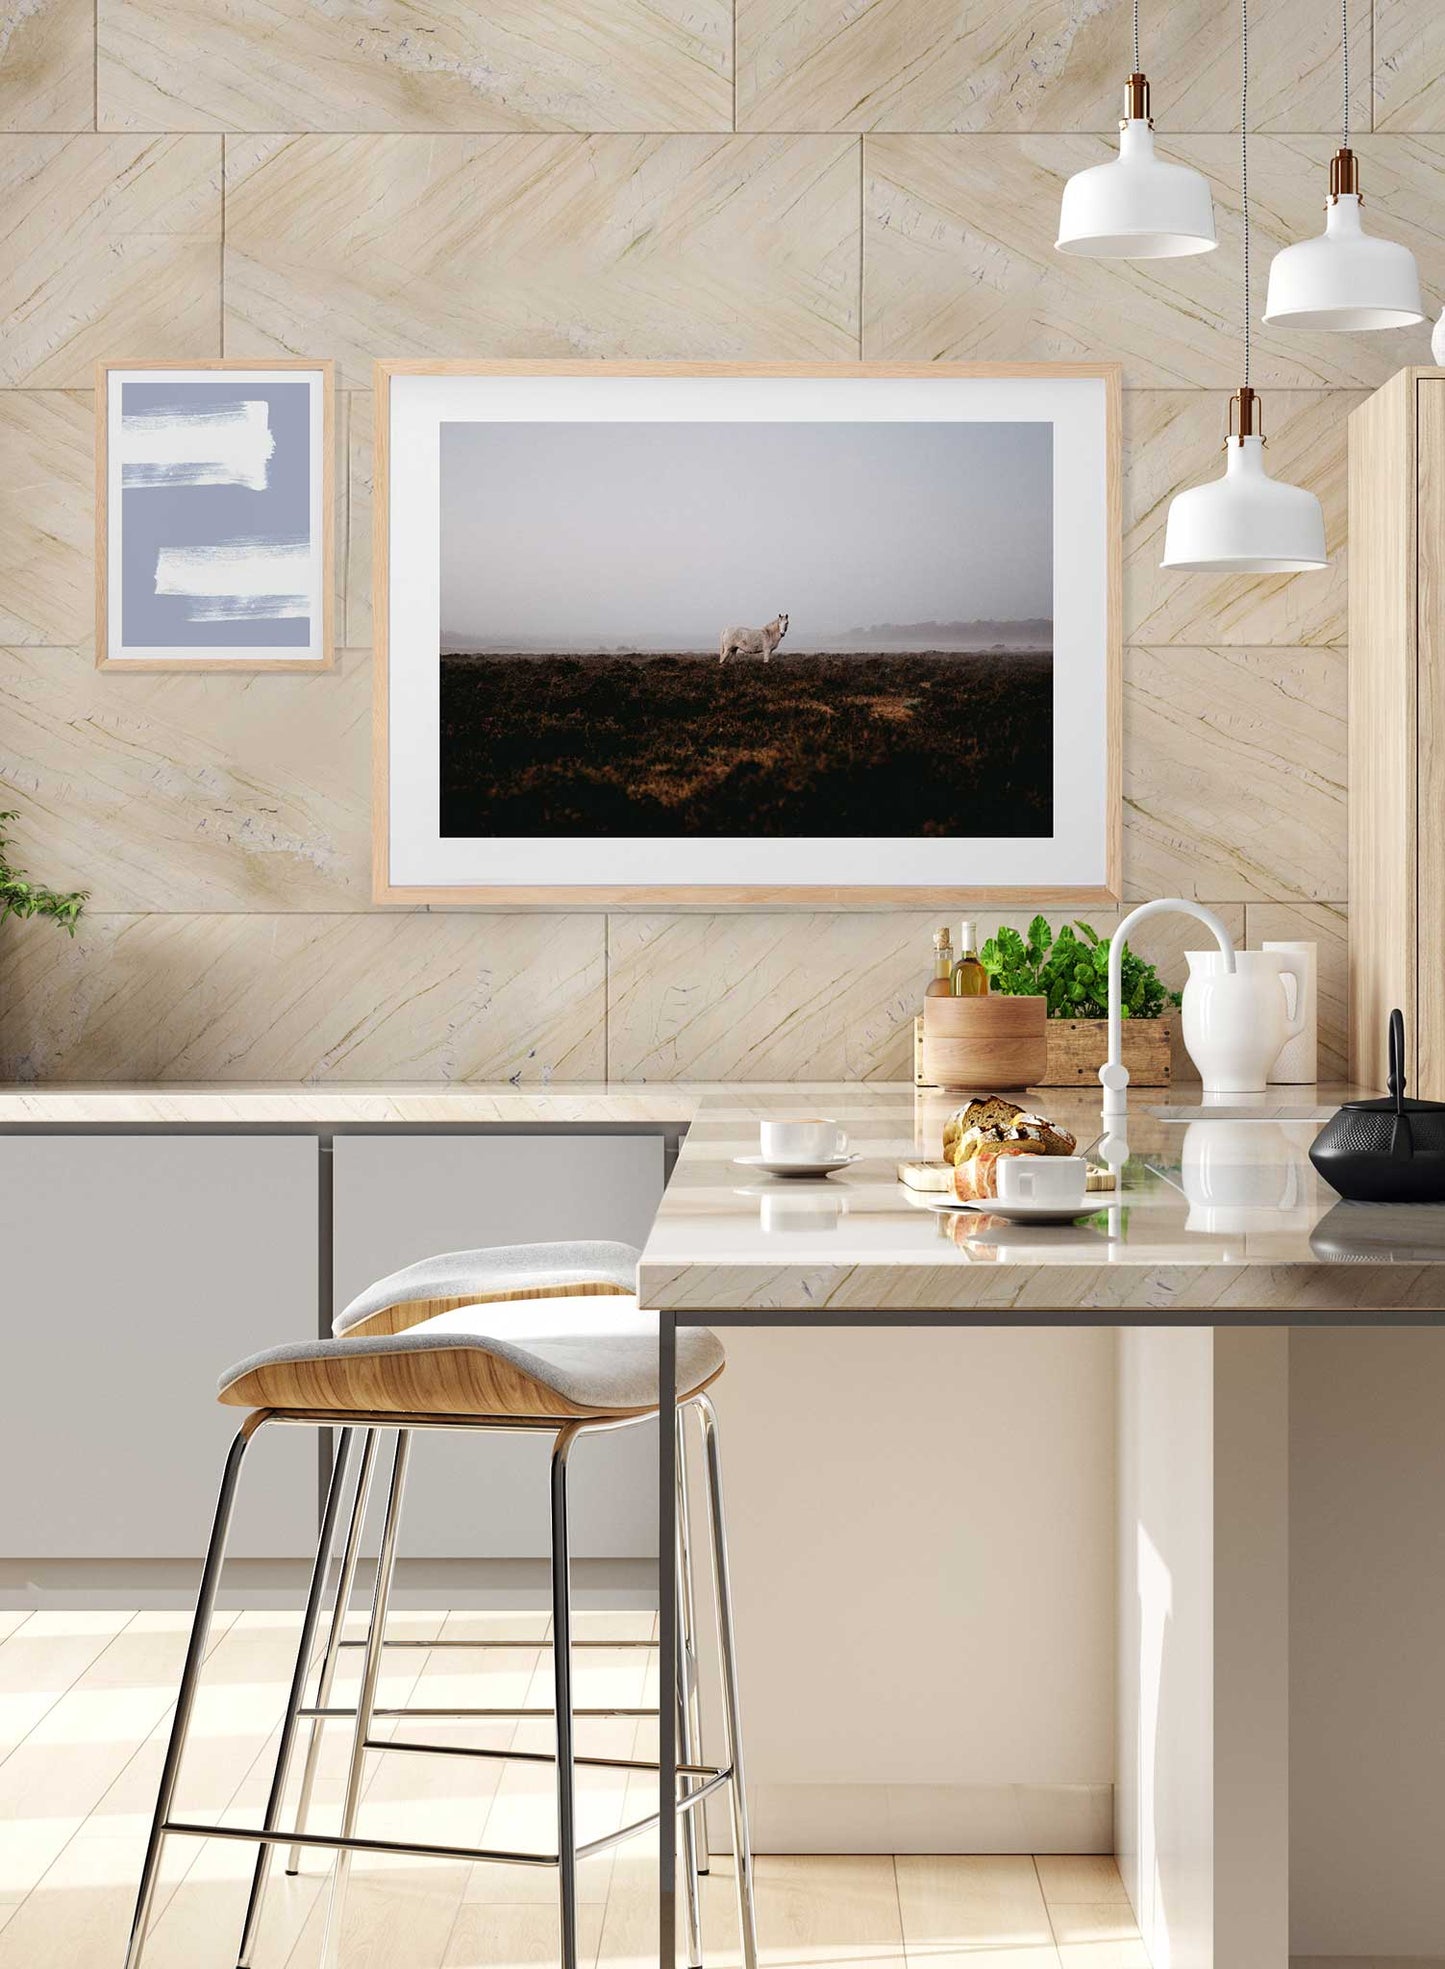 Wild Horse' is an animal and landscape photography poster by Opposite Wall of a wild white horse standing in a vast and foggy field with distant mountains.